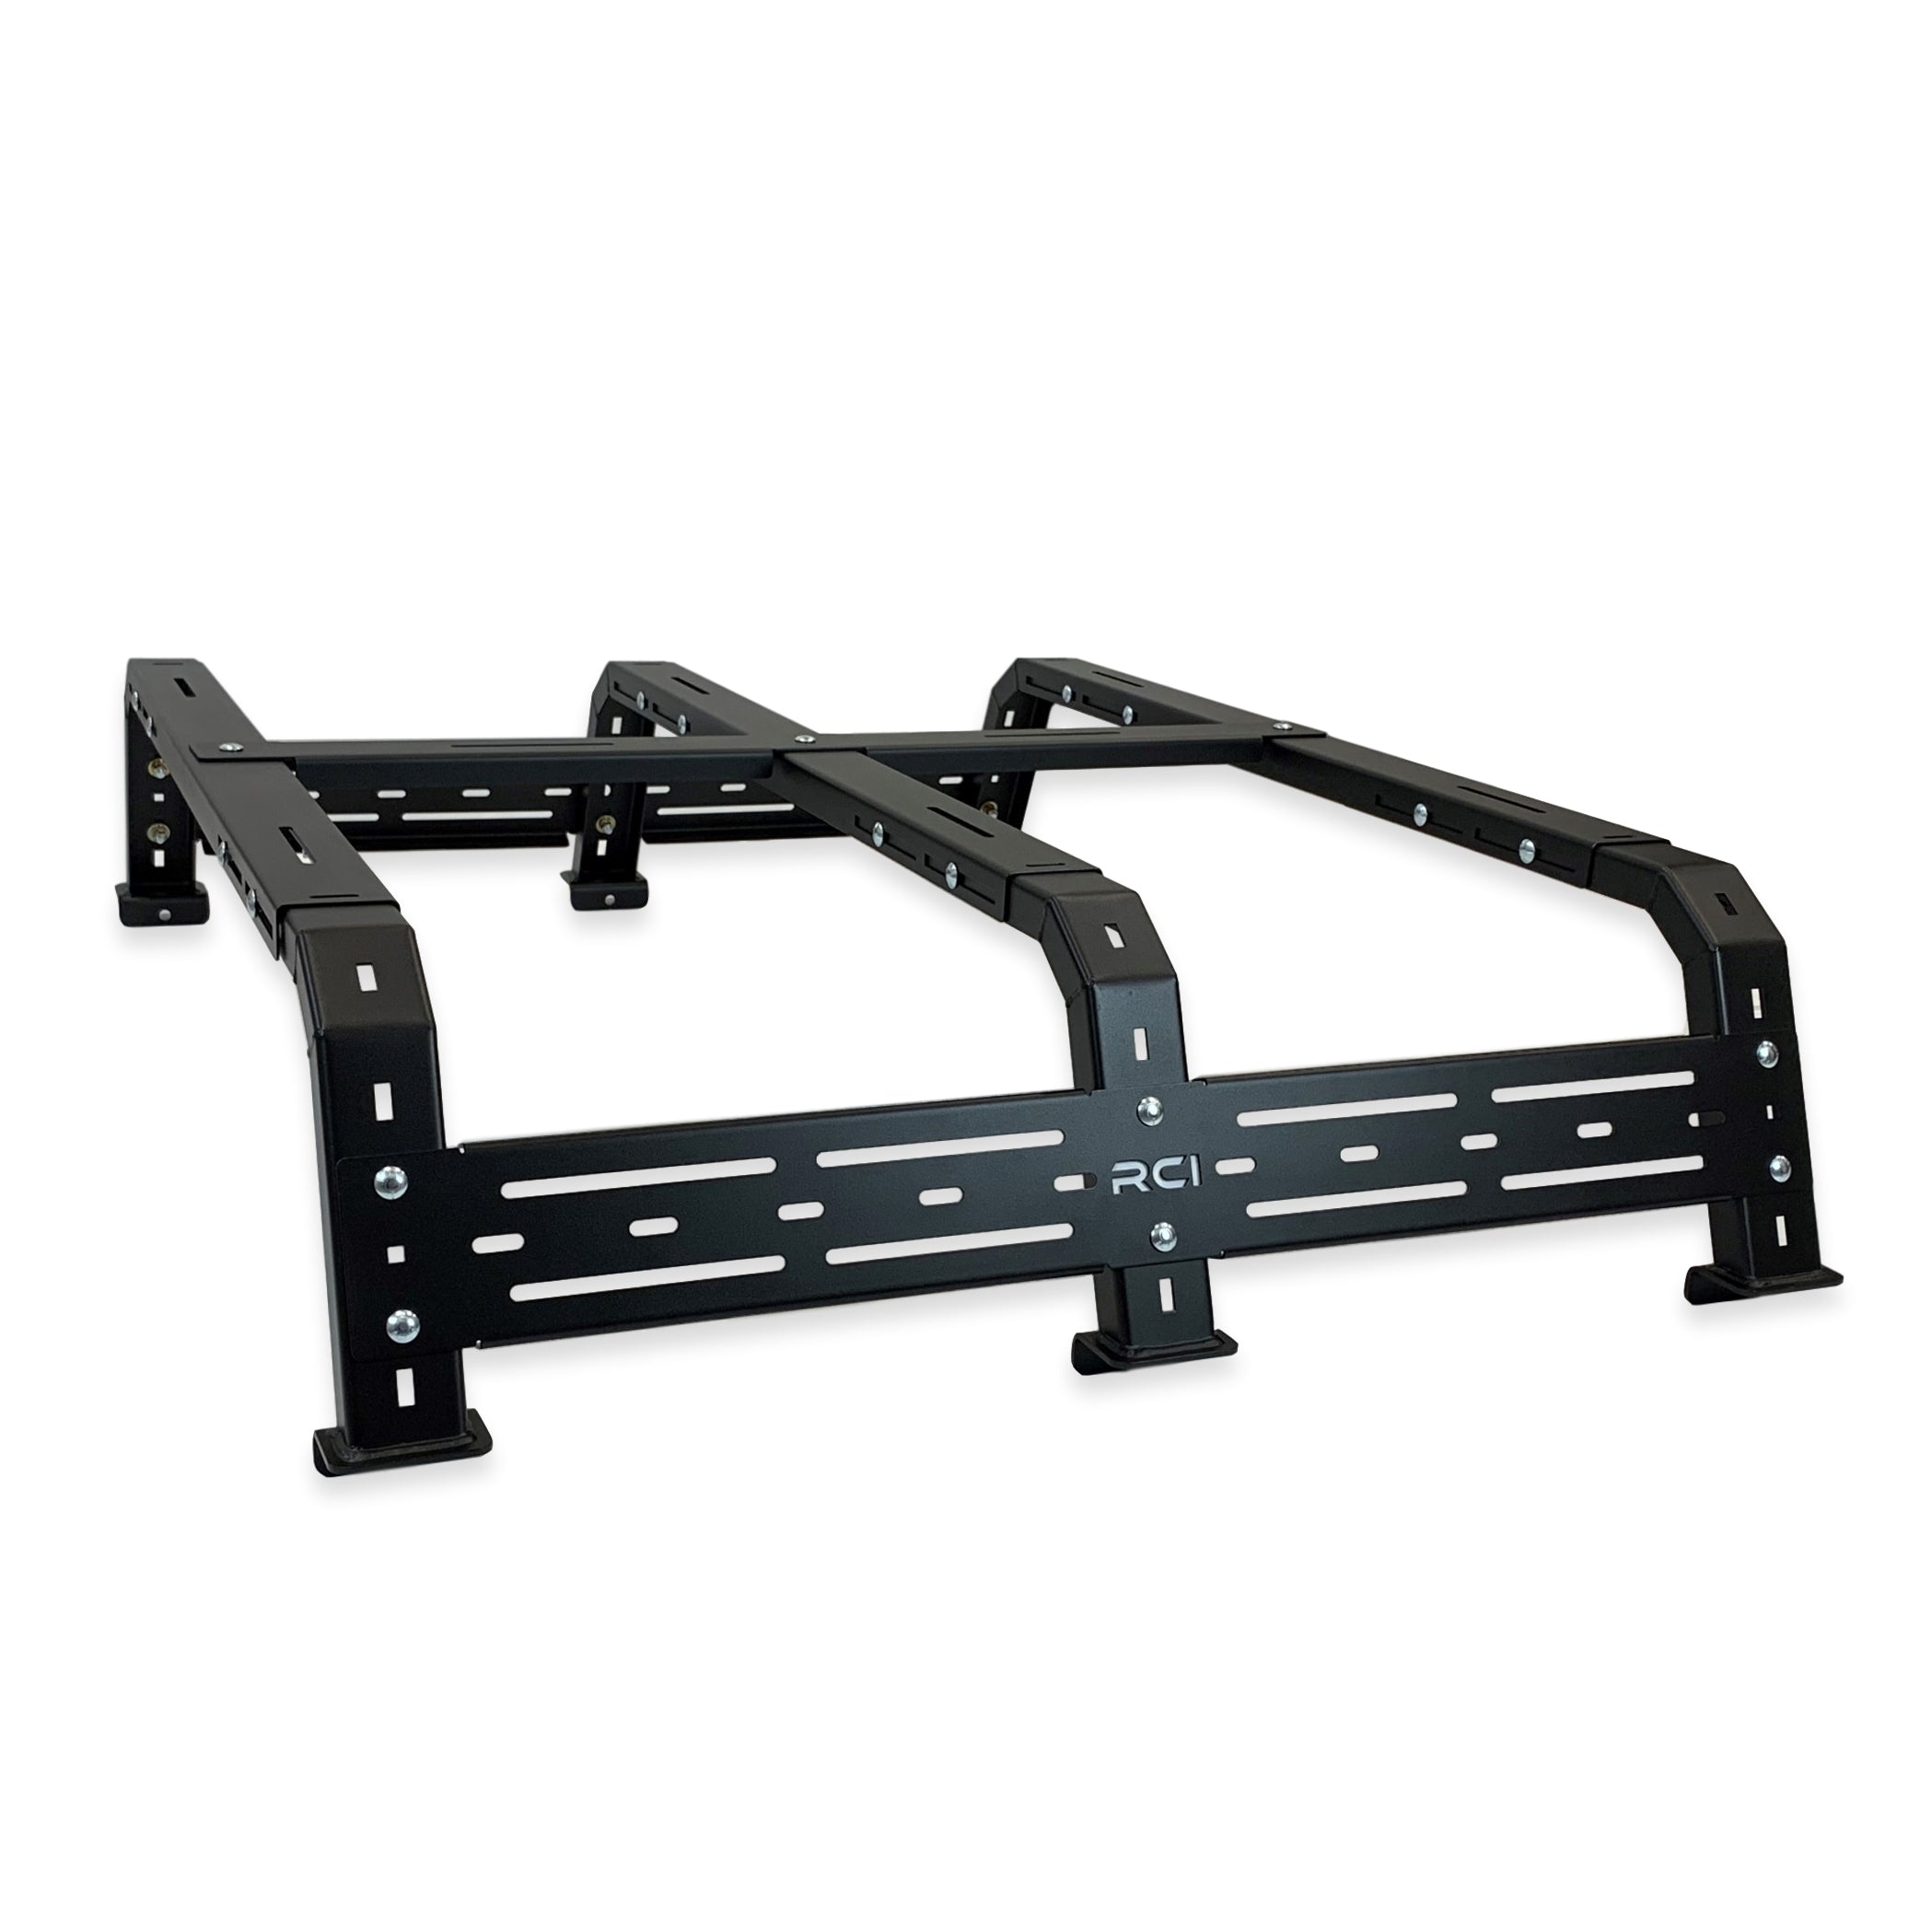 RCI 12" Adjustable Bed Rack For Chevy Pick Up Trucks